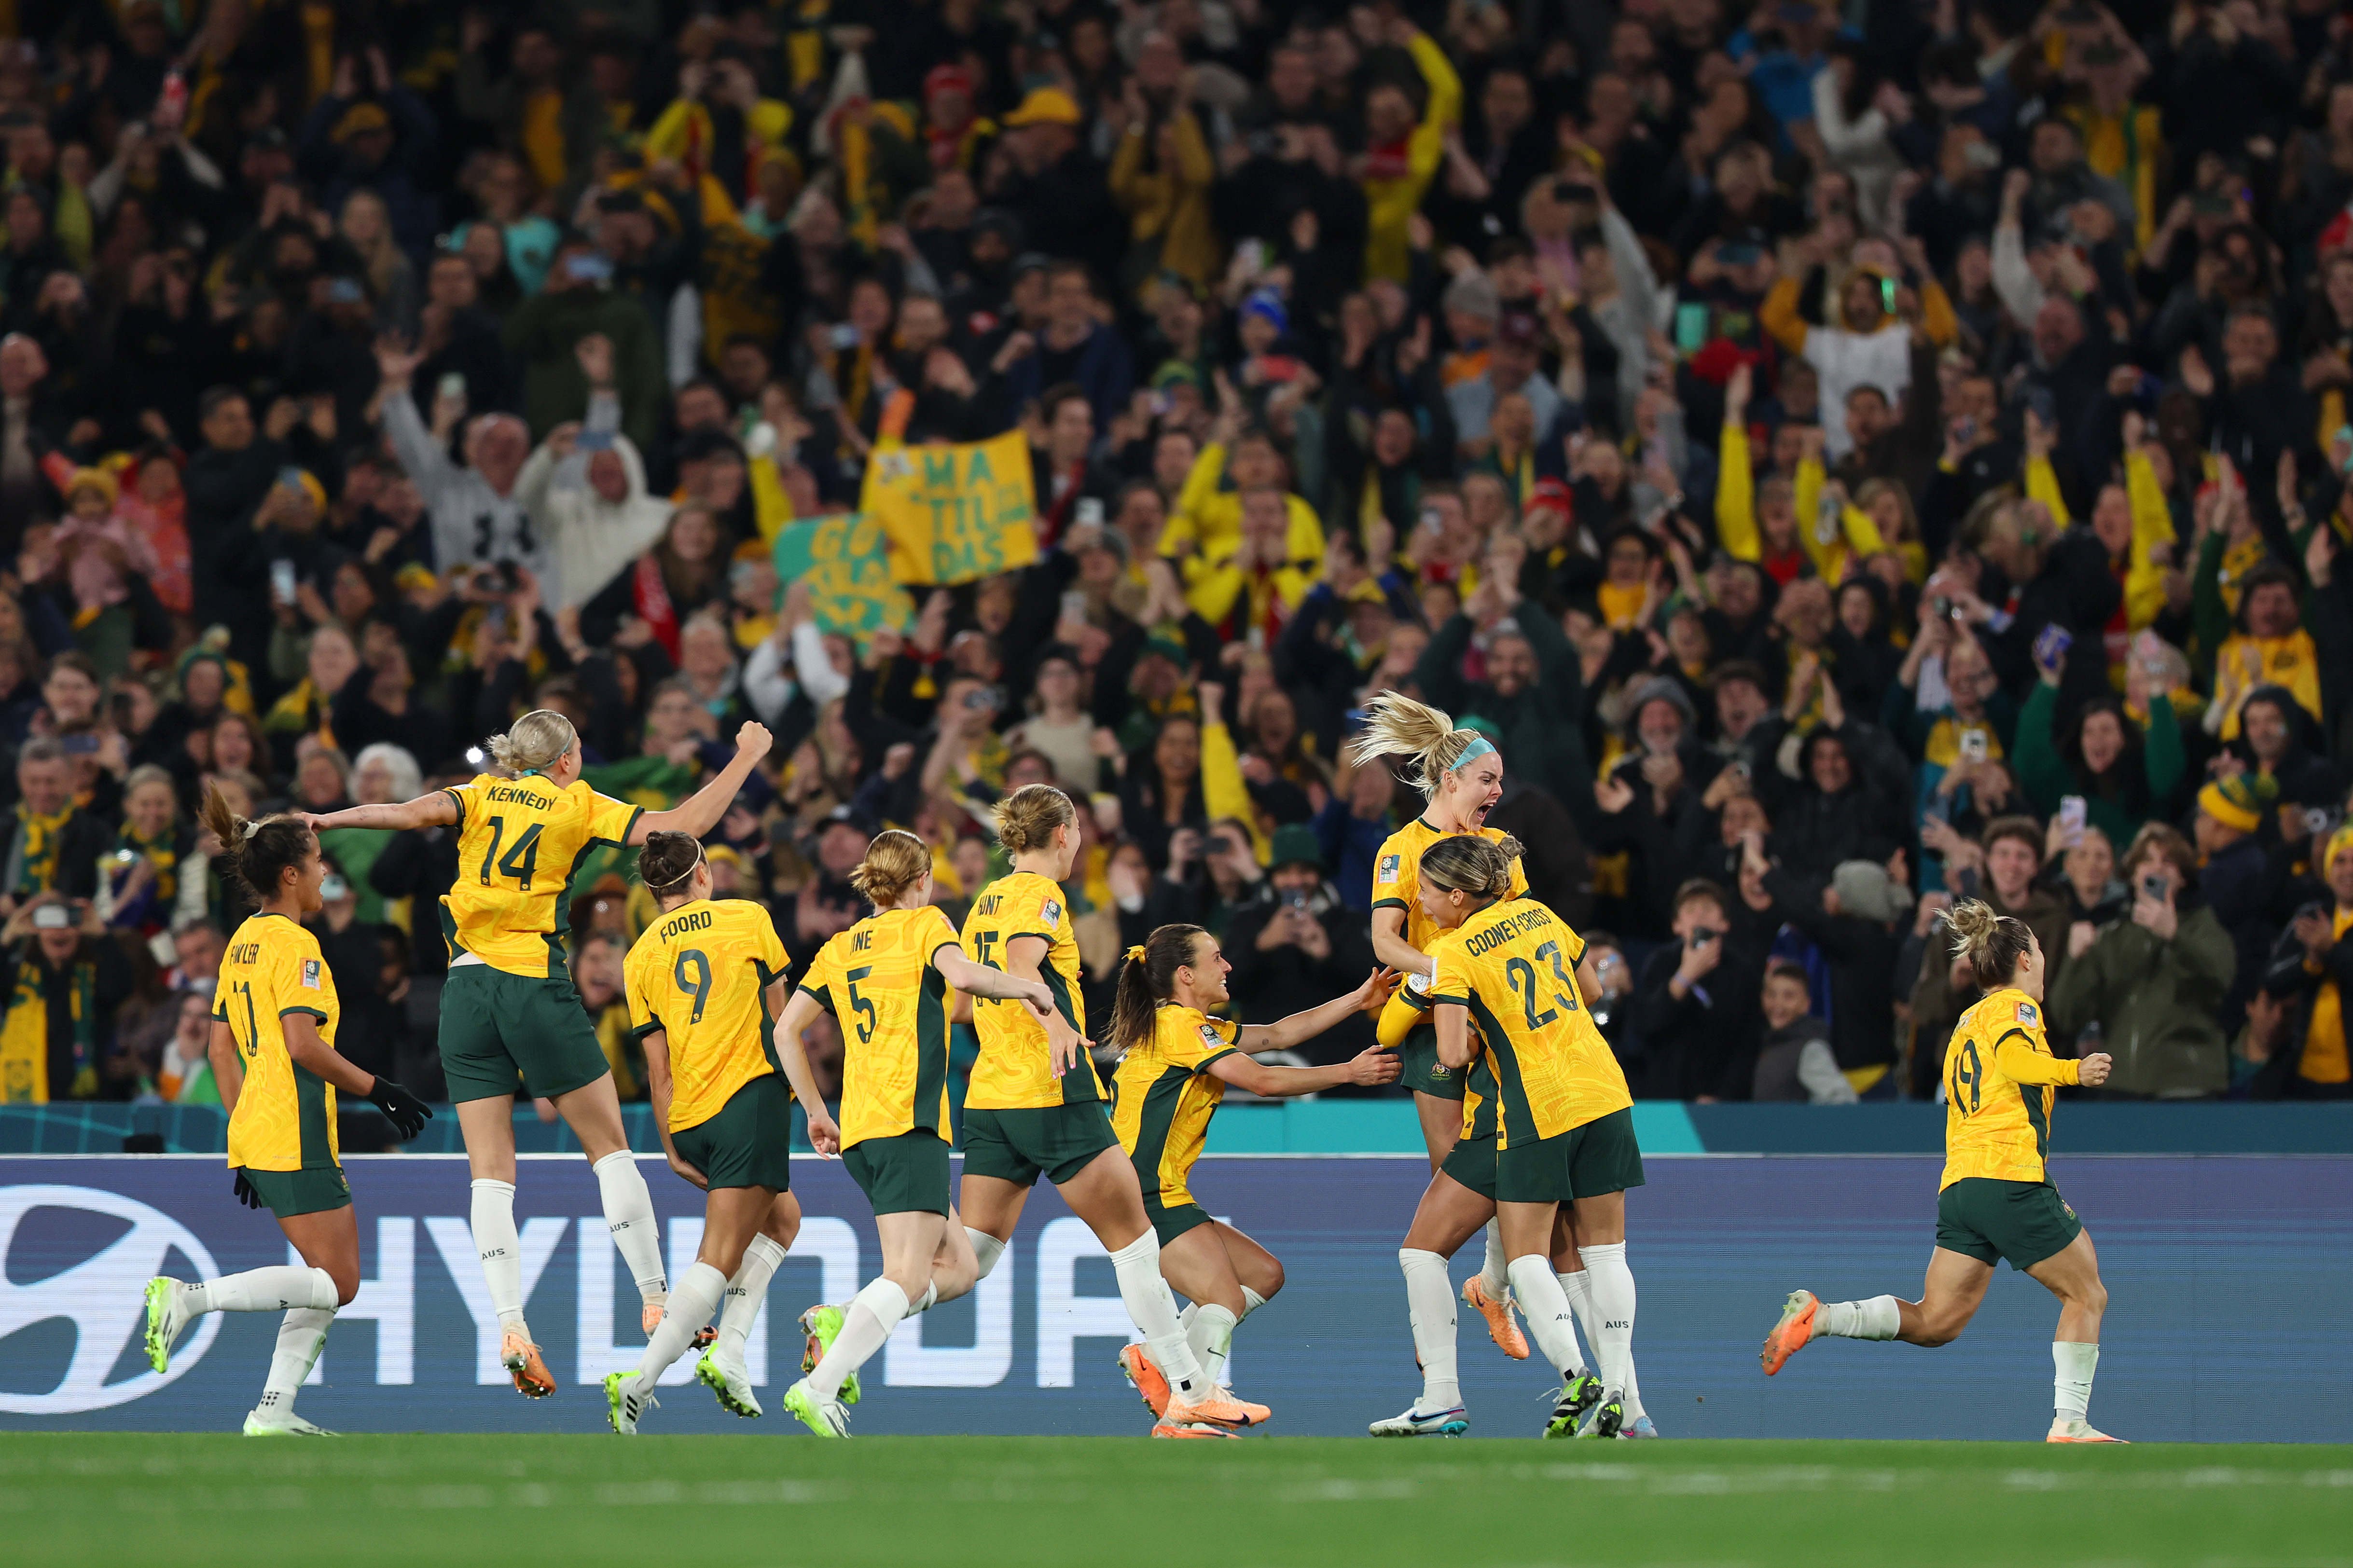 A group of Matildas players run together to celebrate on the field, with fans cheering from the stands.